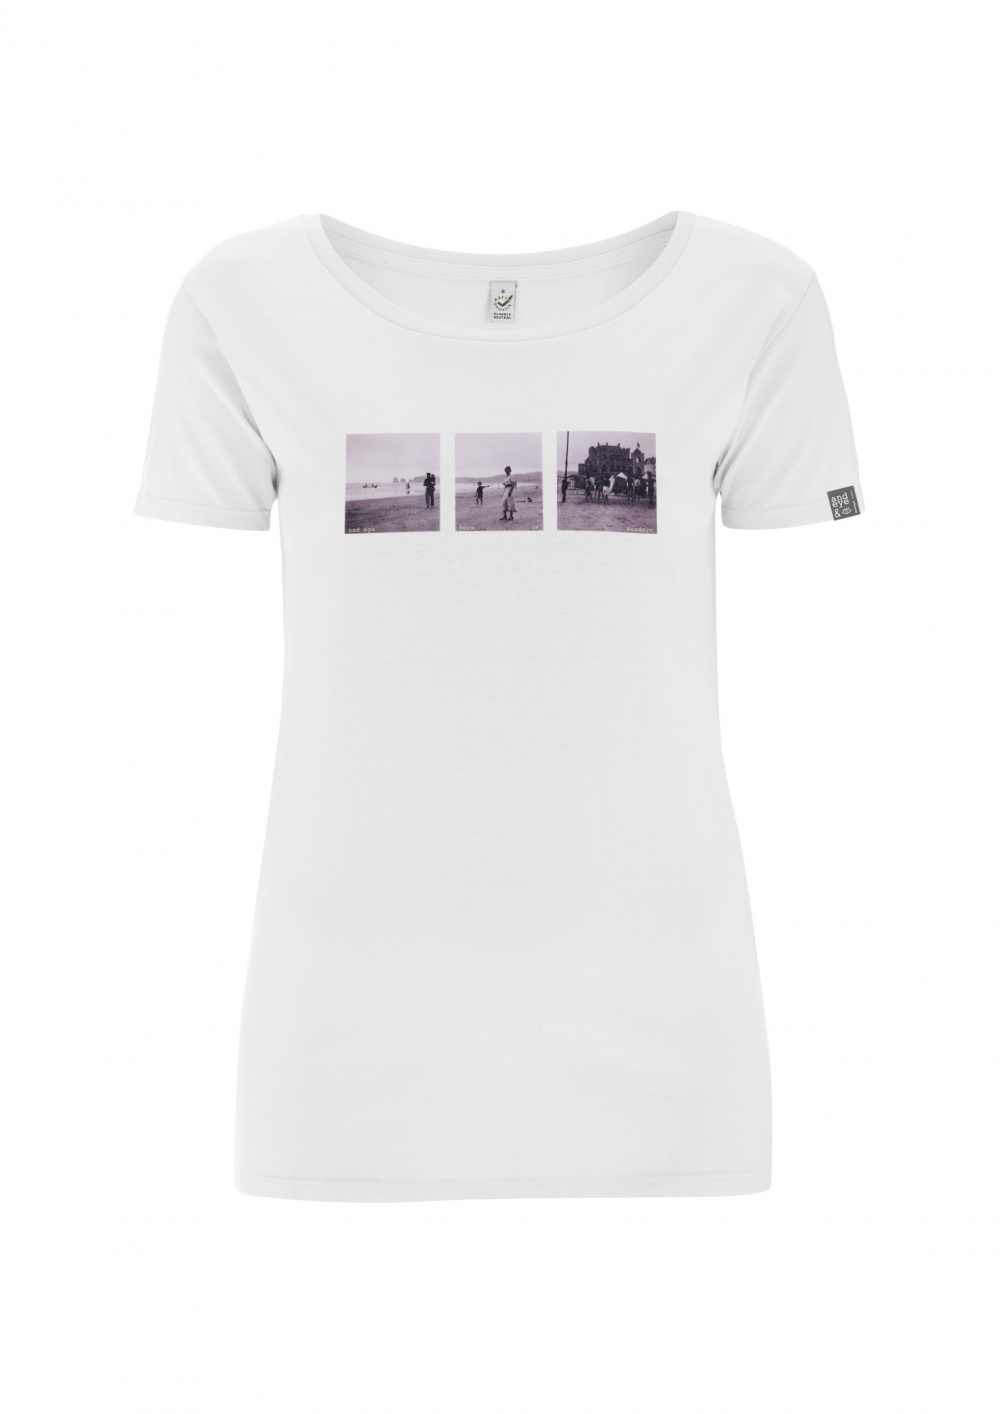 Women's open neck t-shirt wiht vintage image of French Basque country